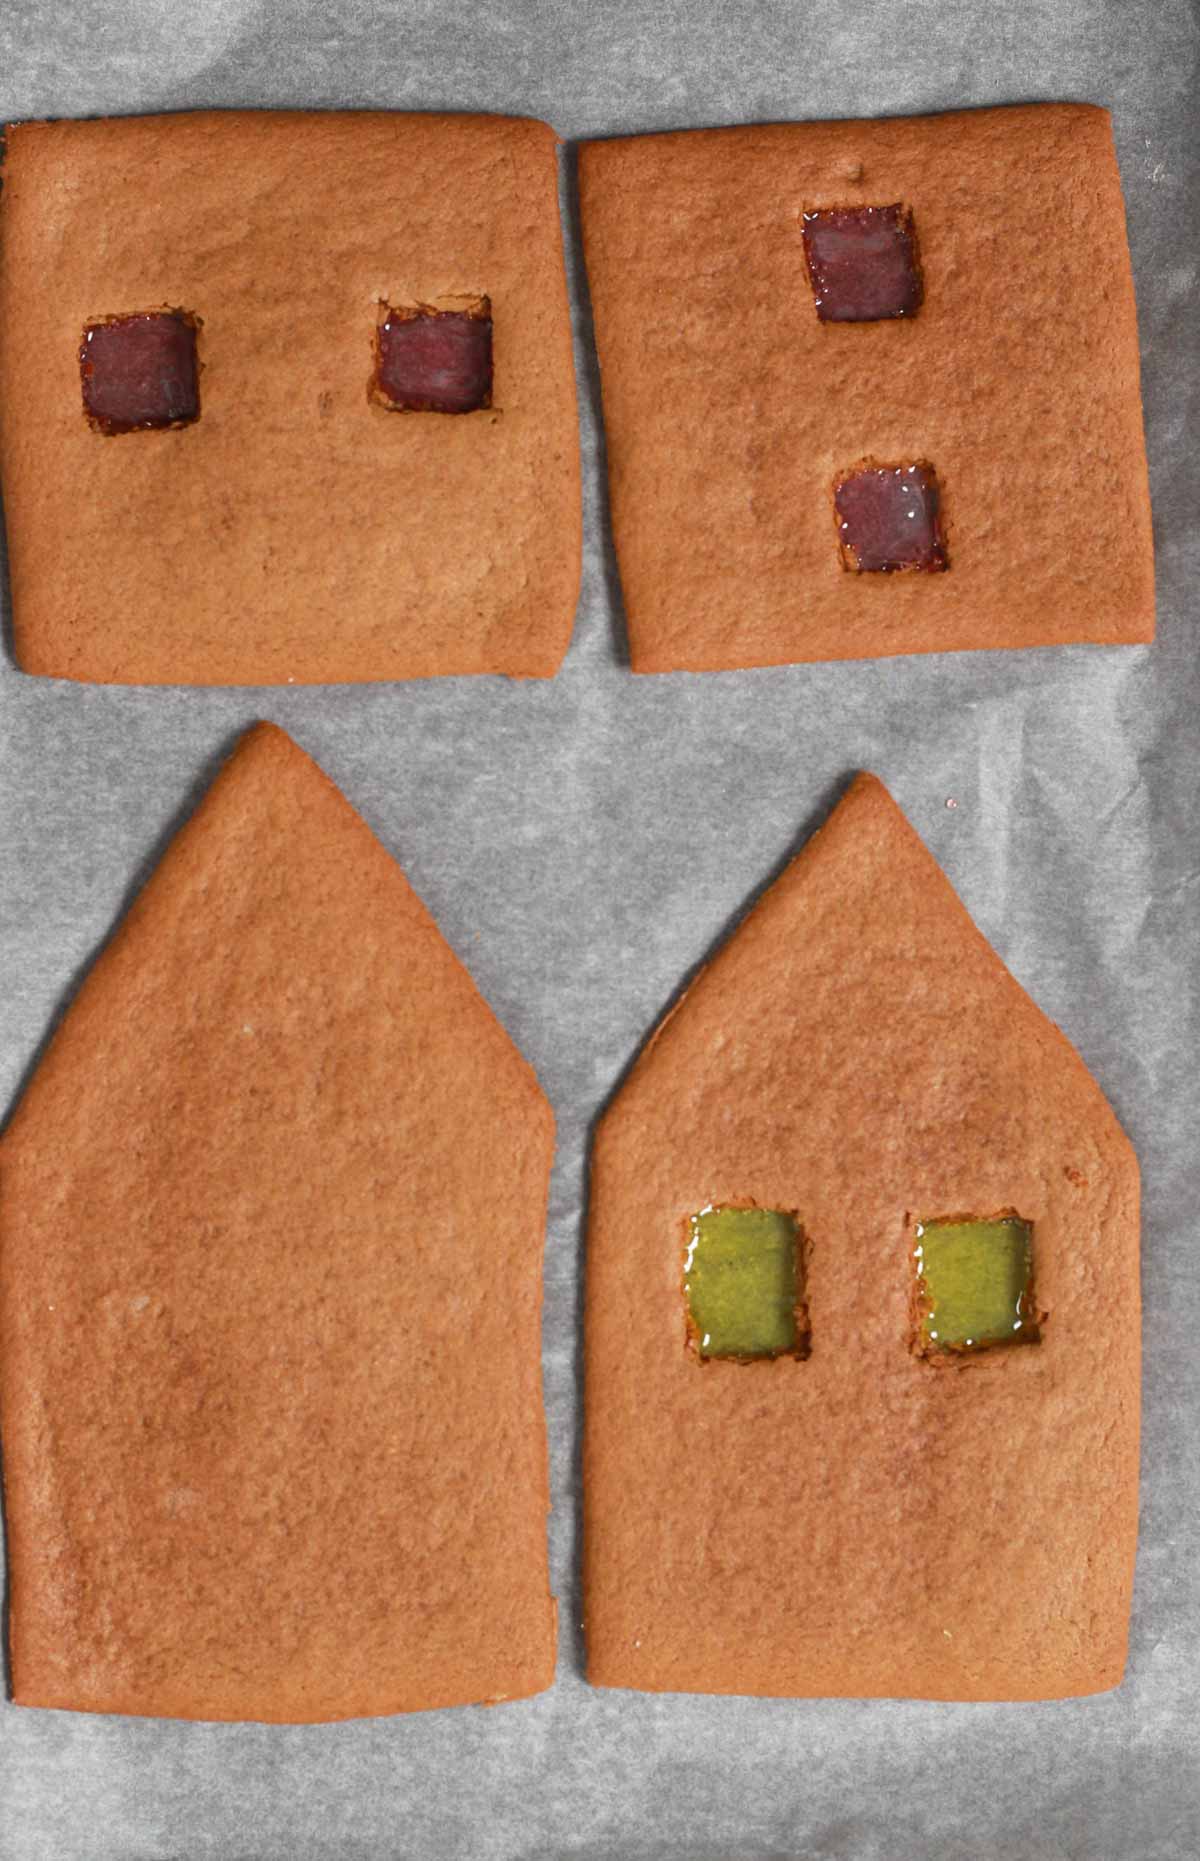 Boiled Sweets Inside Gingerbread Windows After Baking